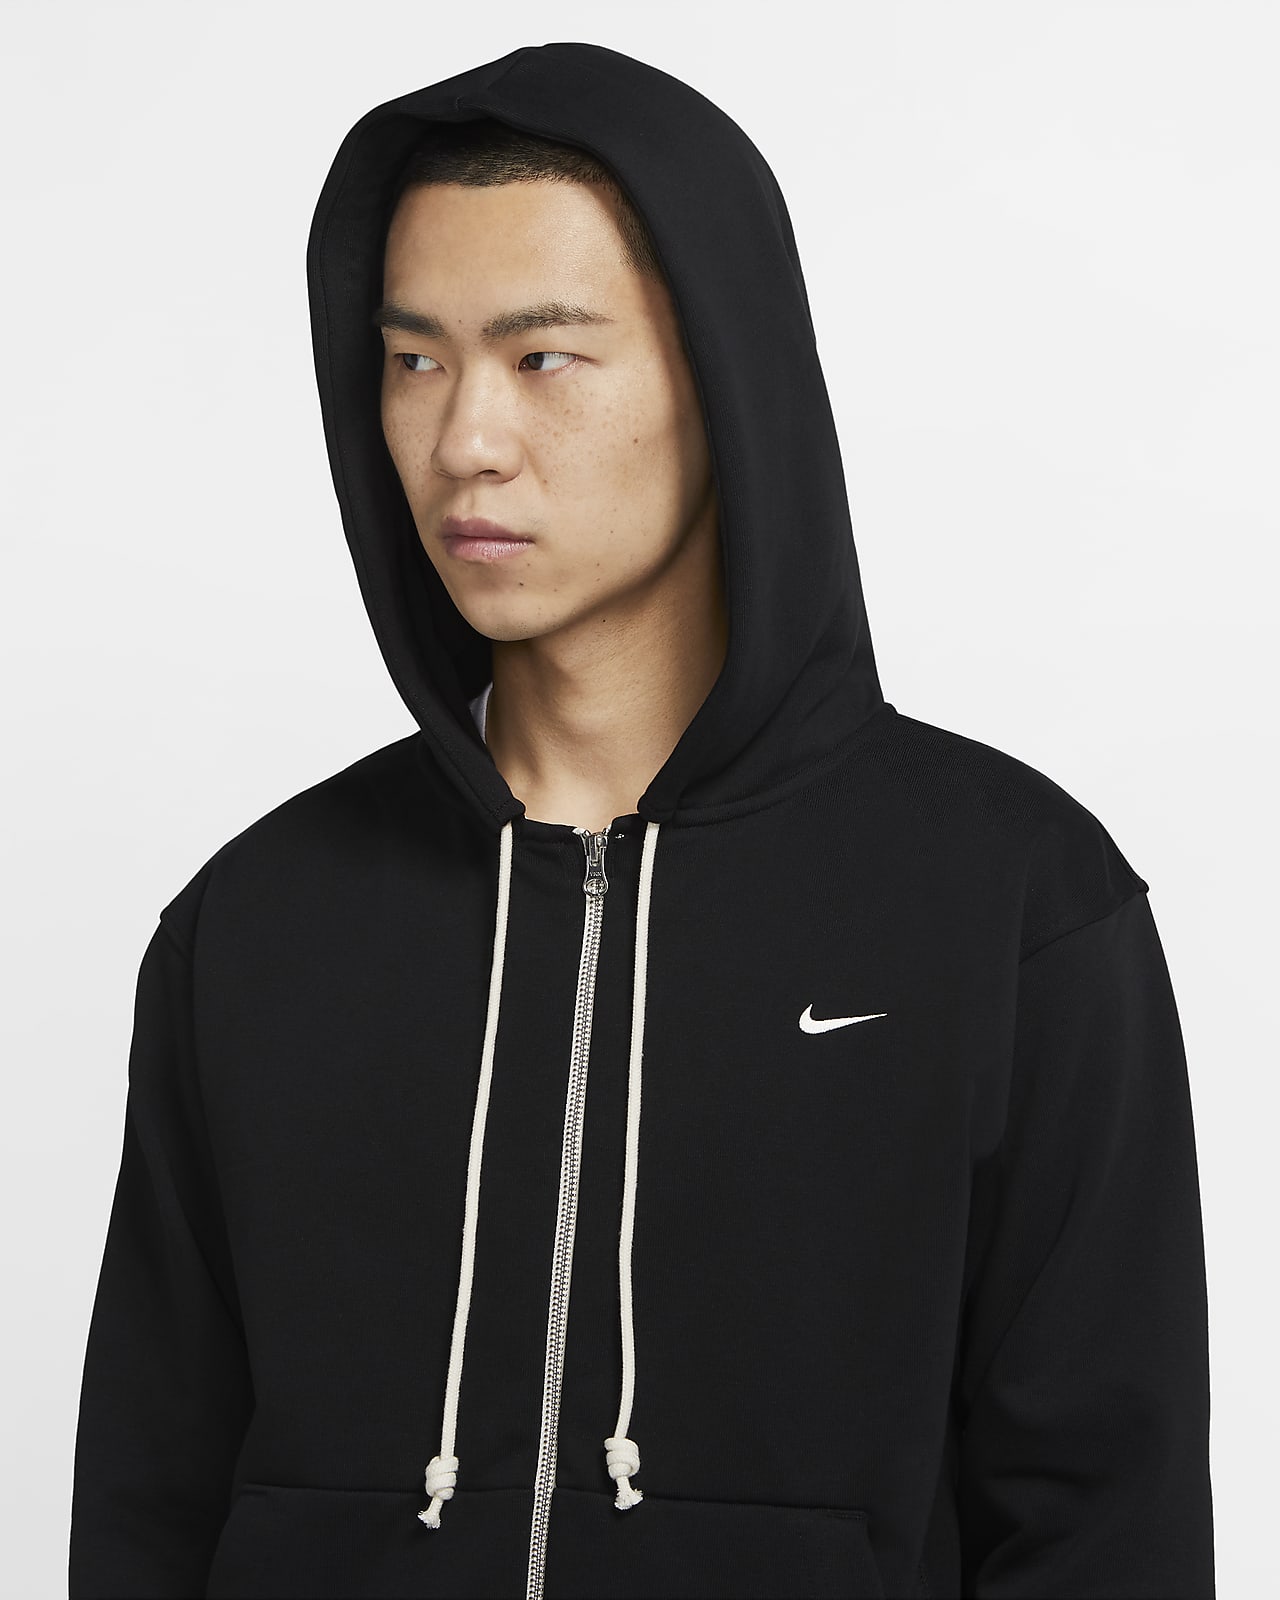 Nike Standard Issue Men's Dri-FIT Pullover Basketball Hoodie.